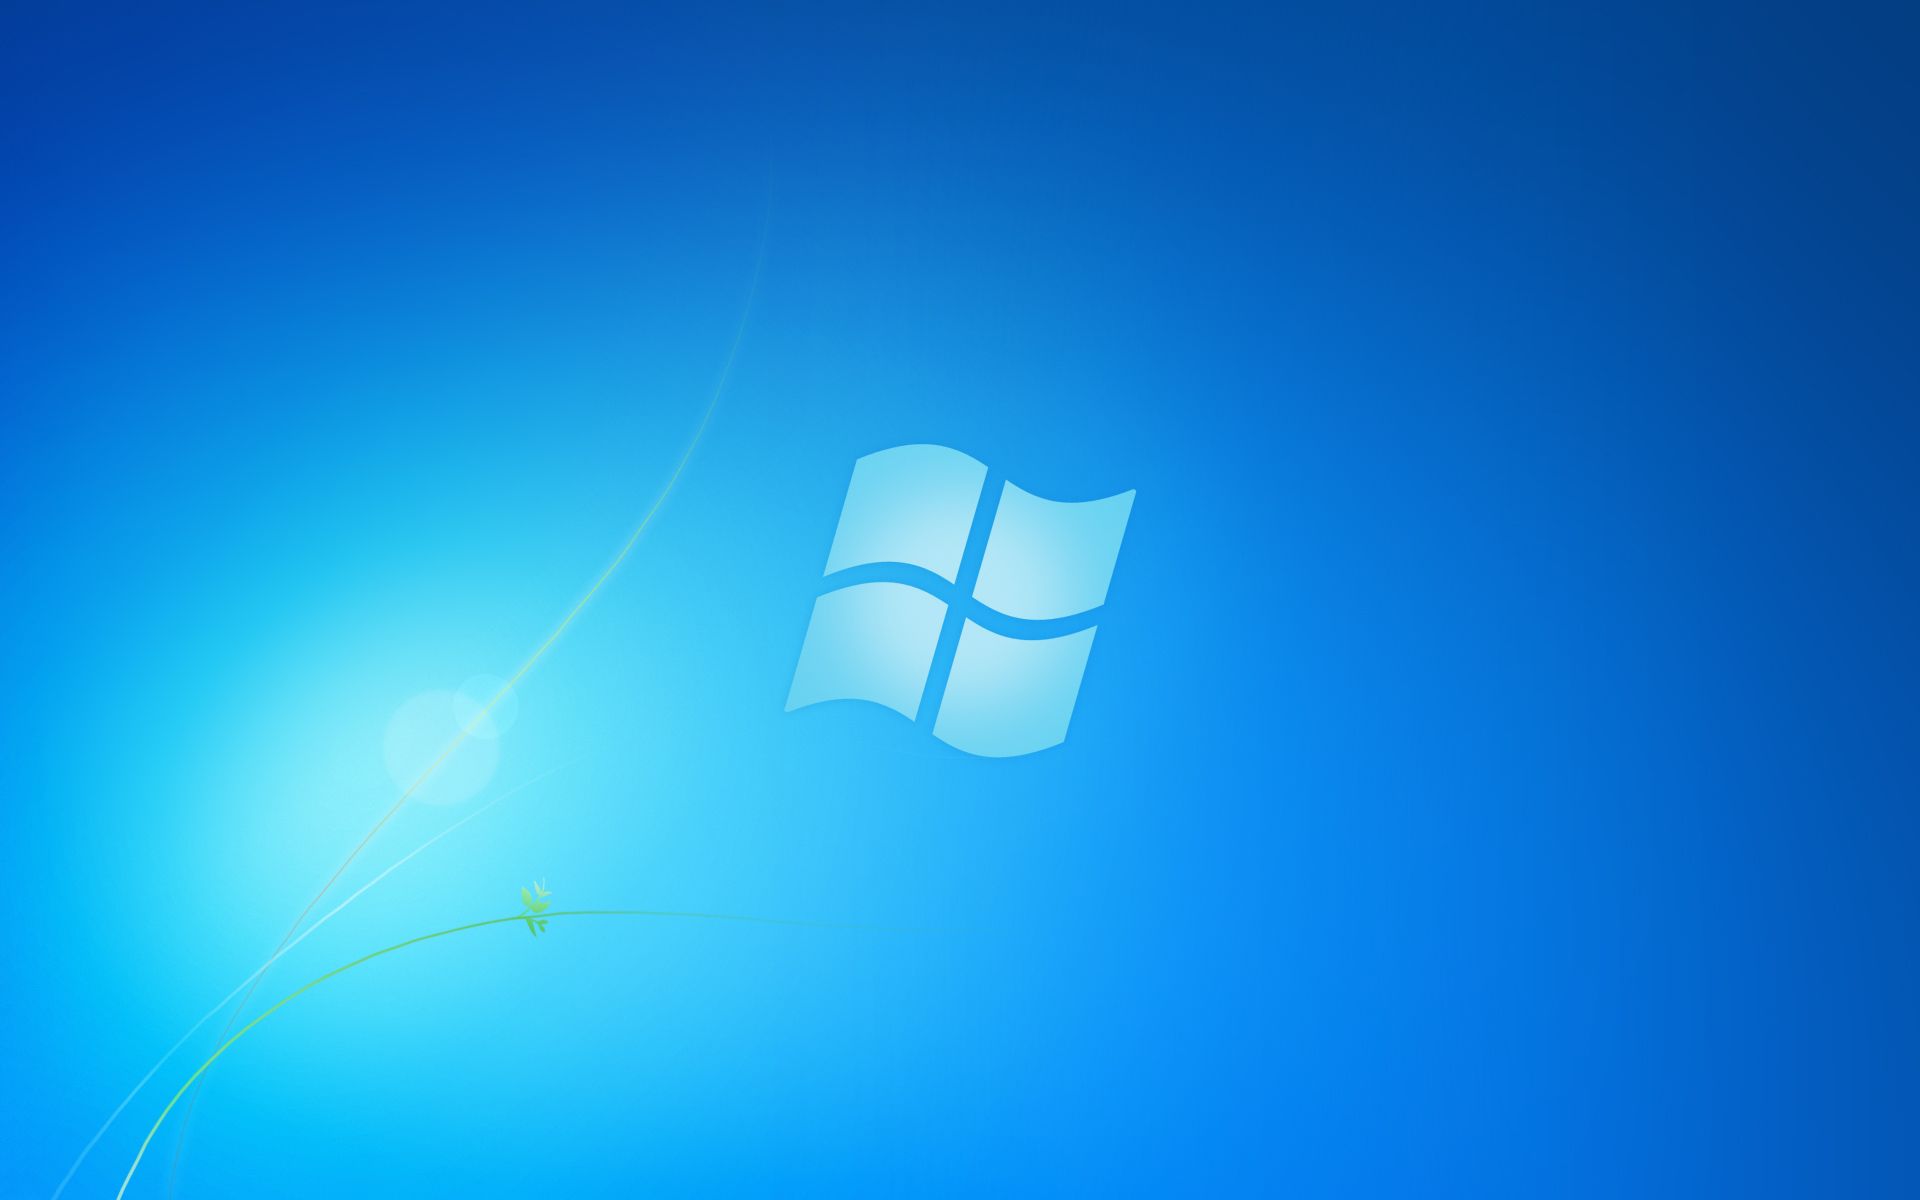 How to change your wallpaper in Windows 7 Starter Edition